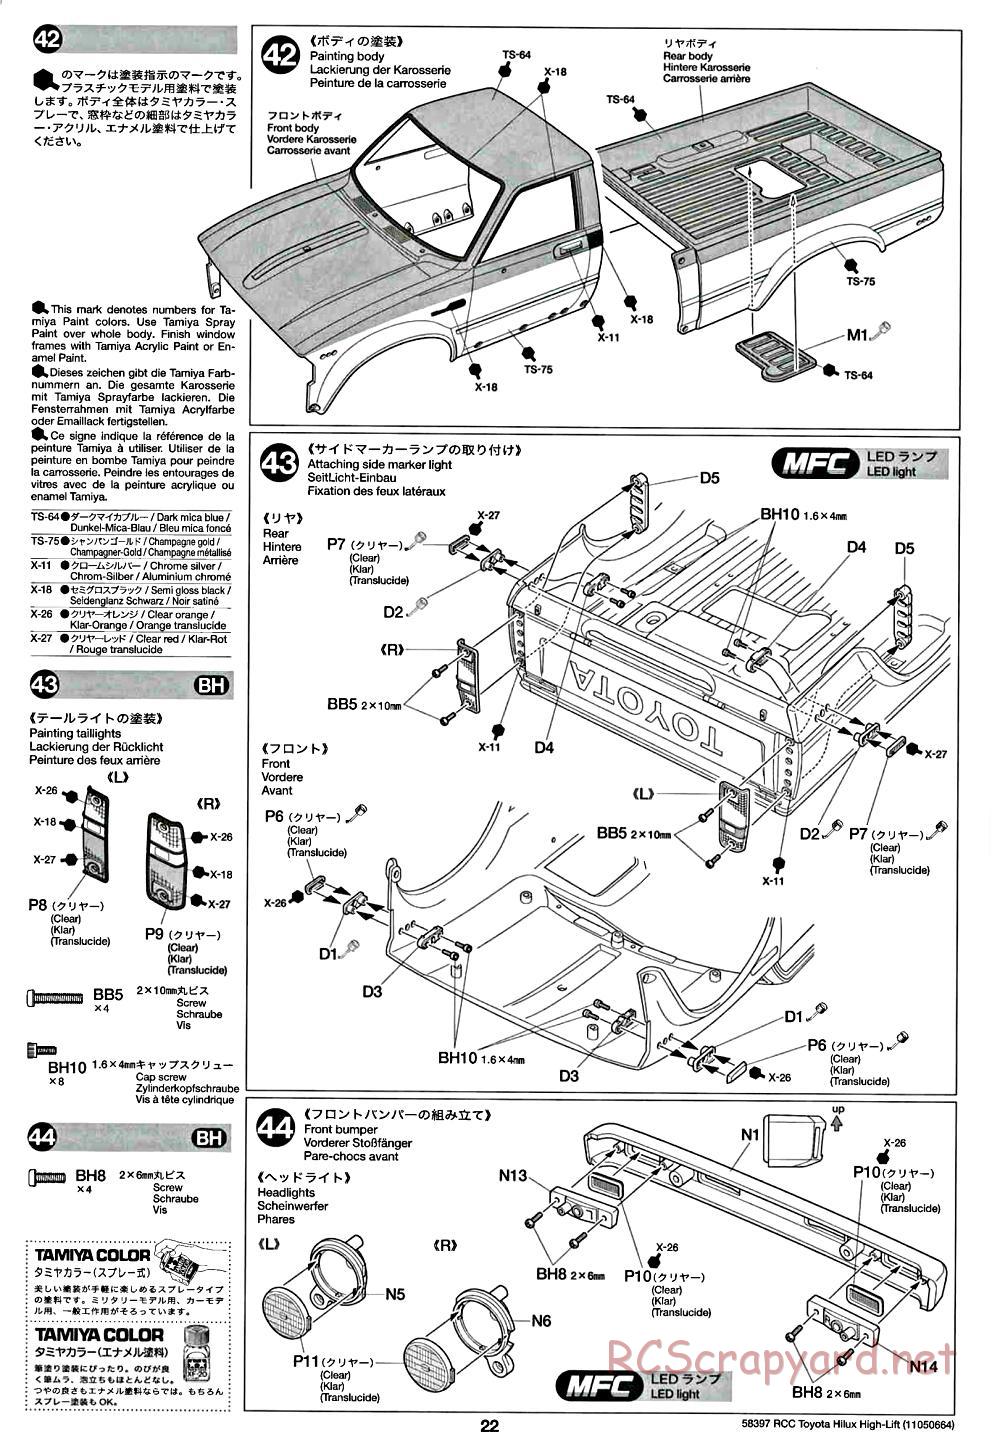 Tamiya - Toyota Hilux High-Lift Chassis - Manual - Page 22